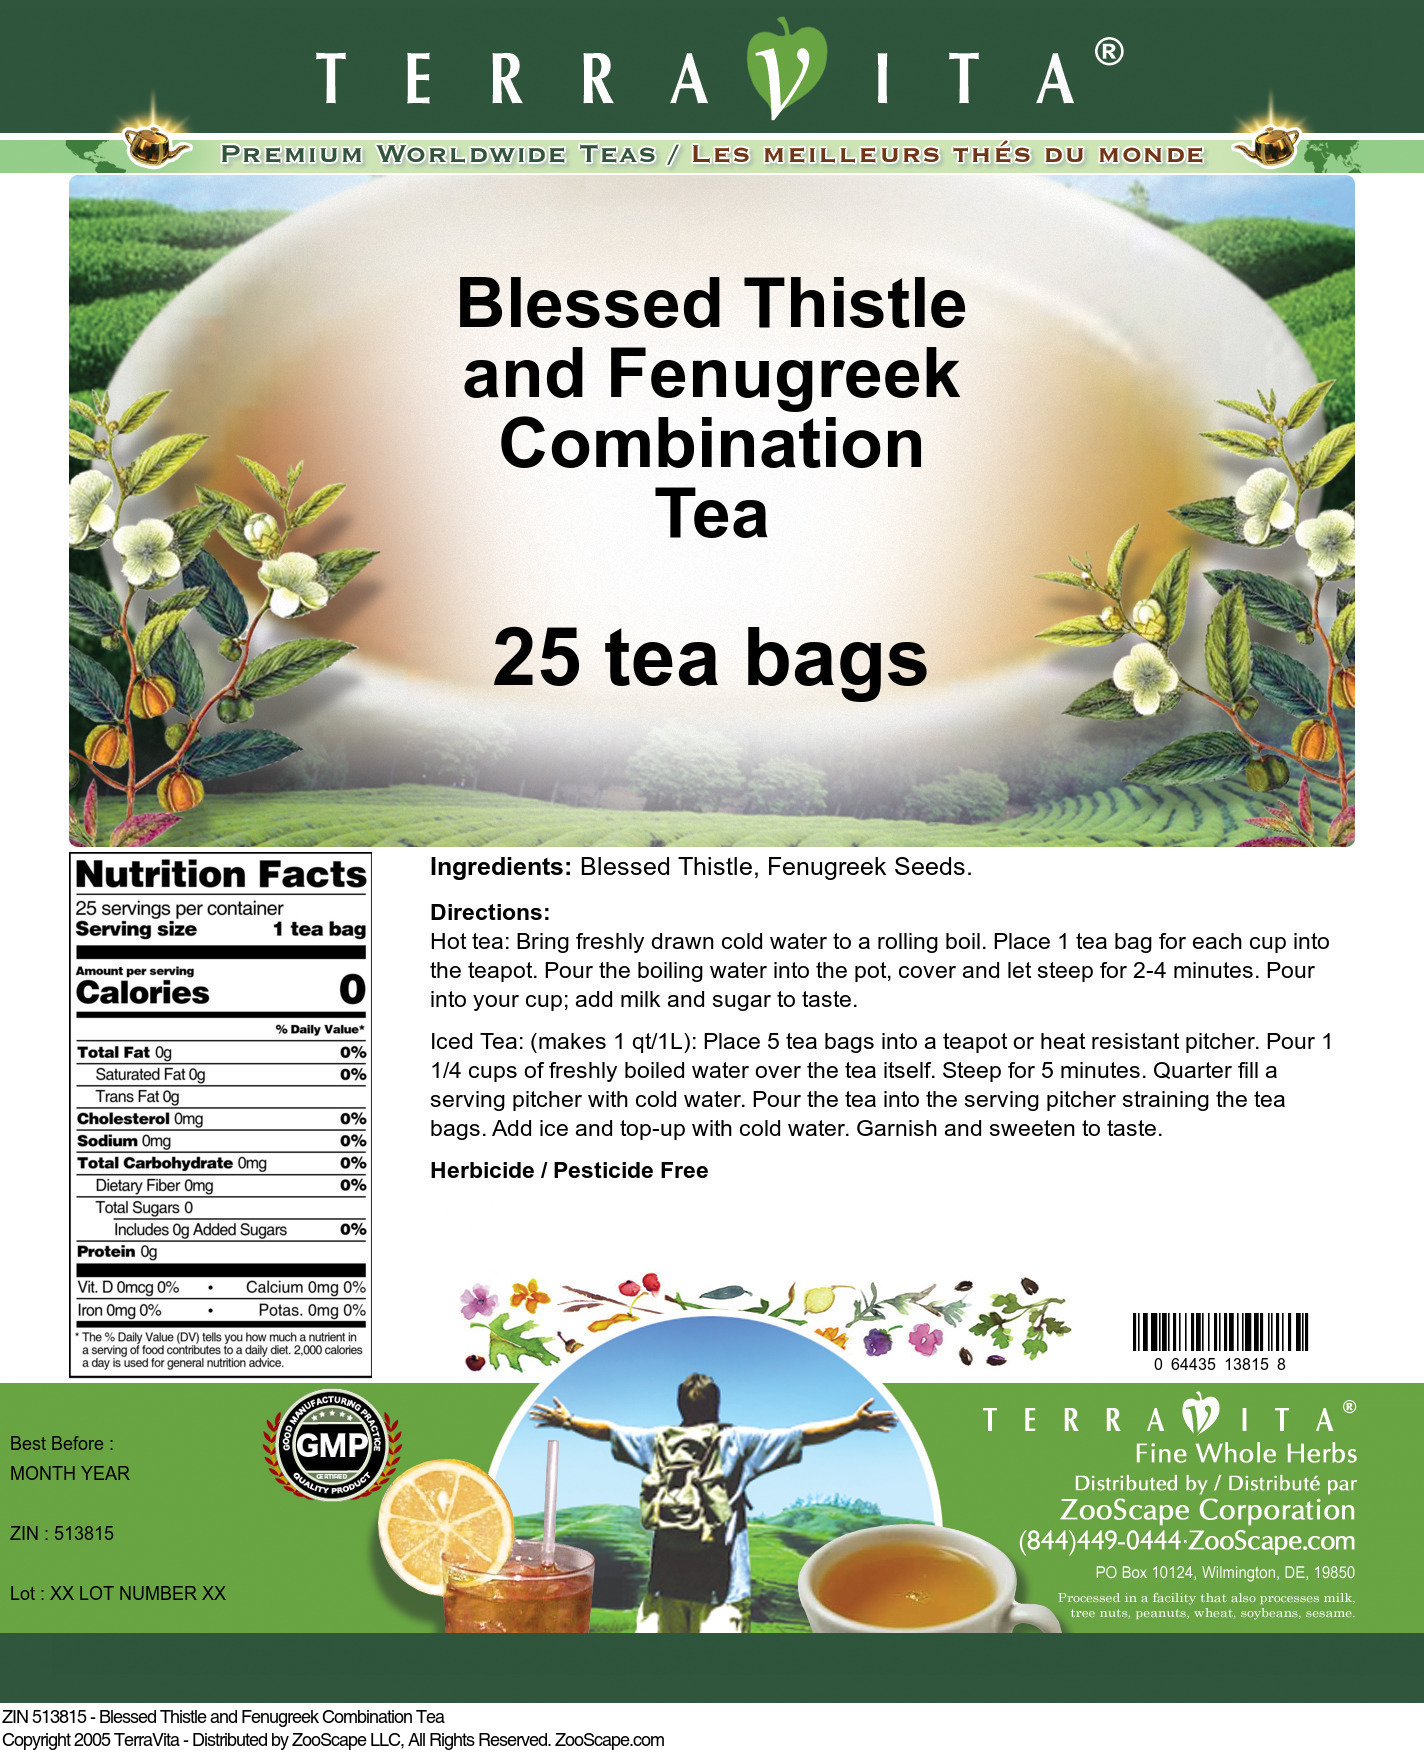 Blessed Thistle and Fenugreek Combination Tea - Label